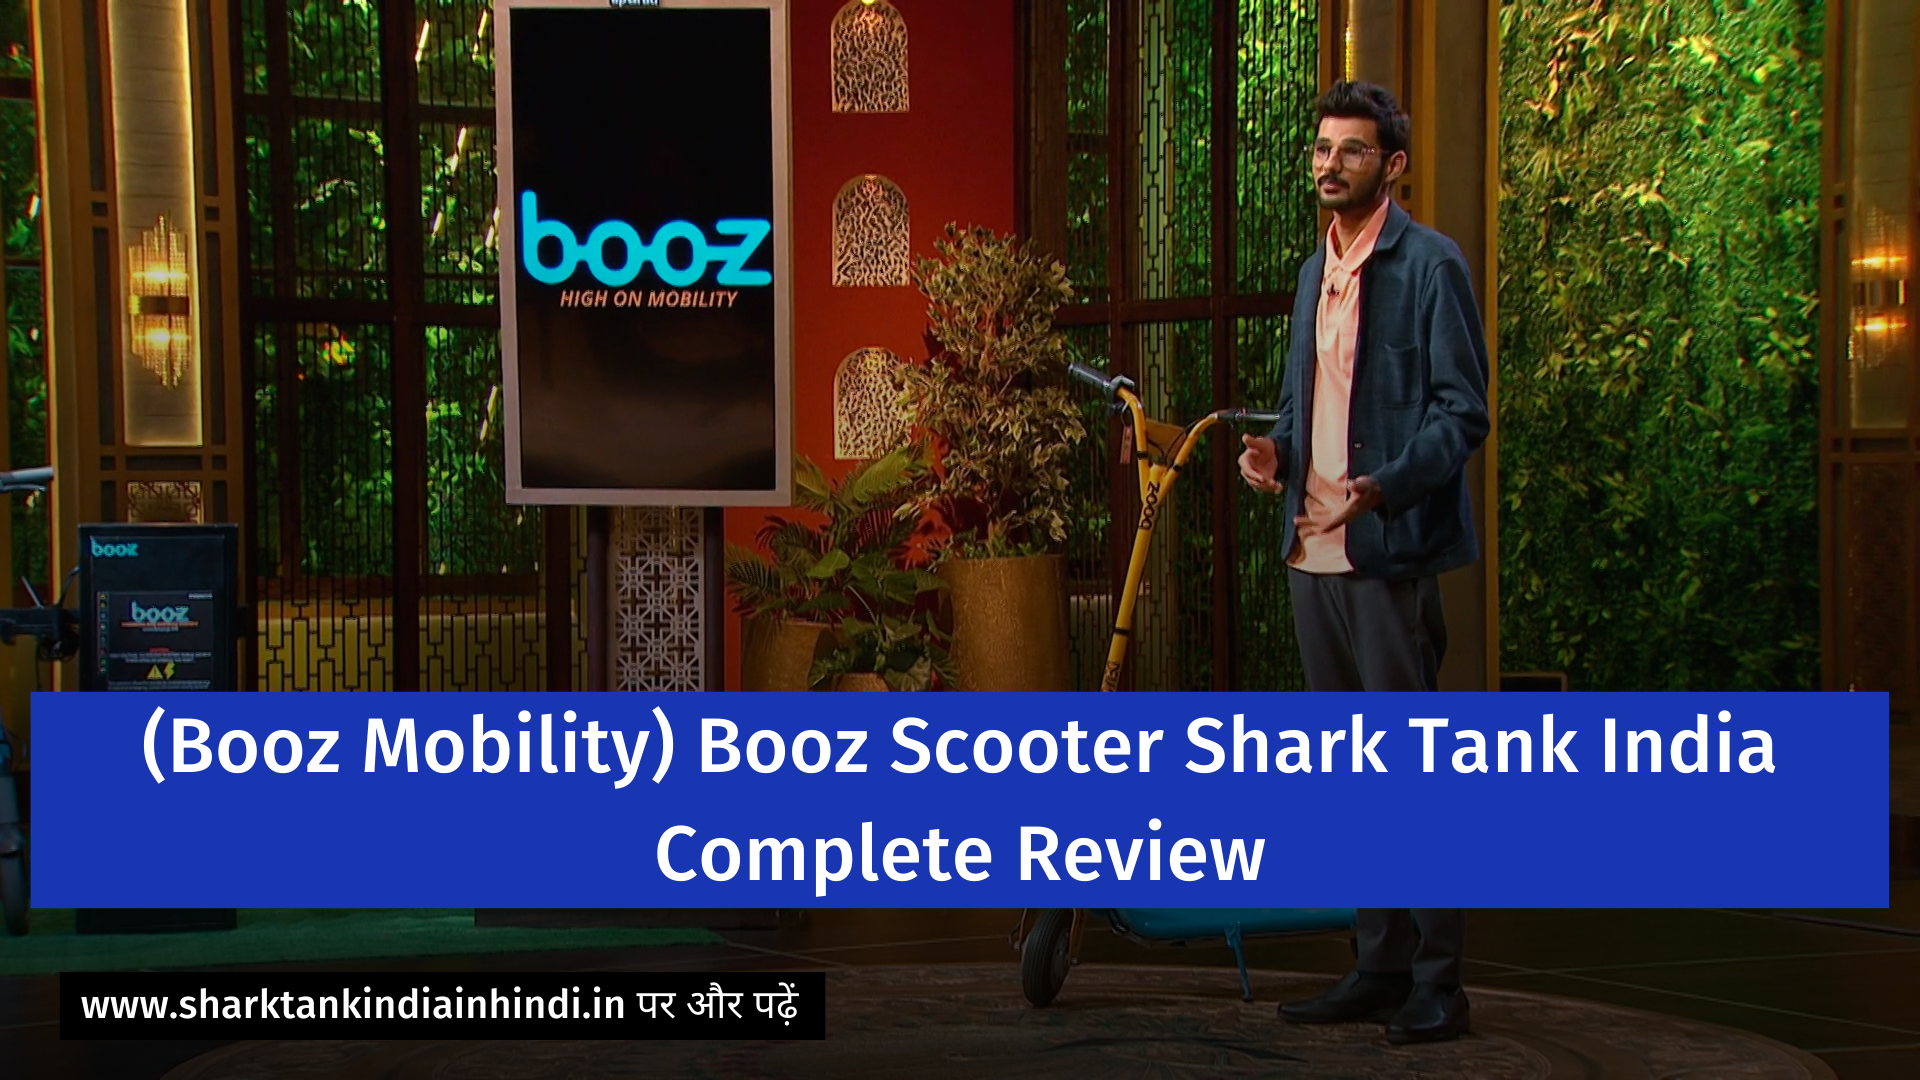 (Booz Mobility) Booz Scooter Shark Tank India Complete Review (6)